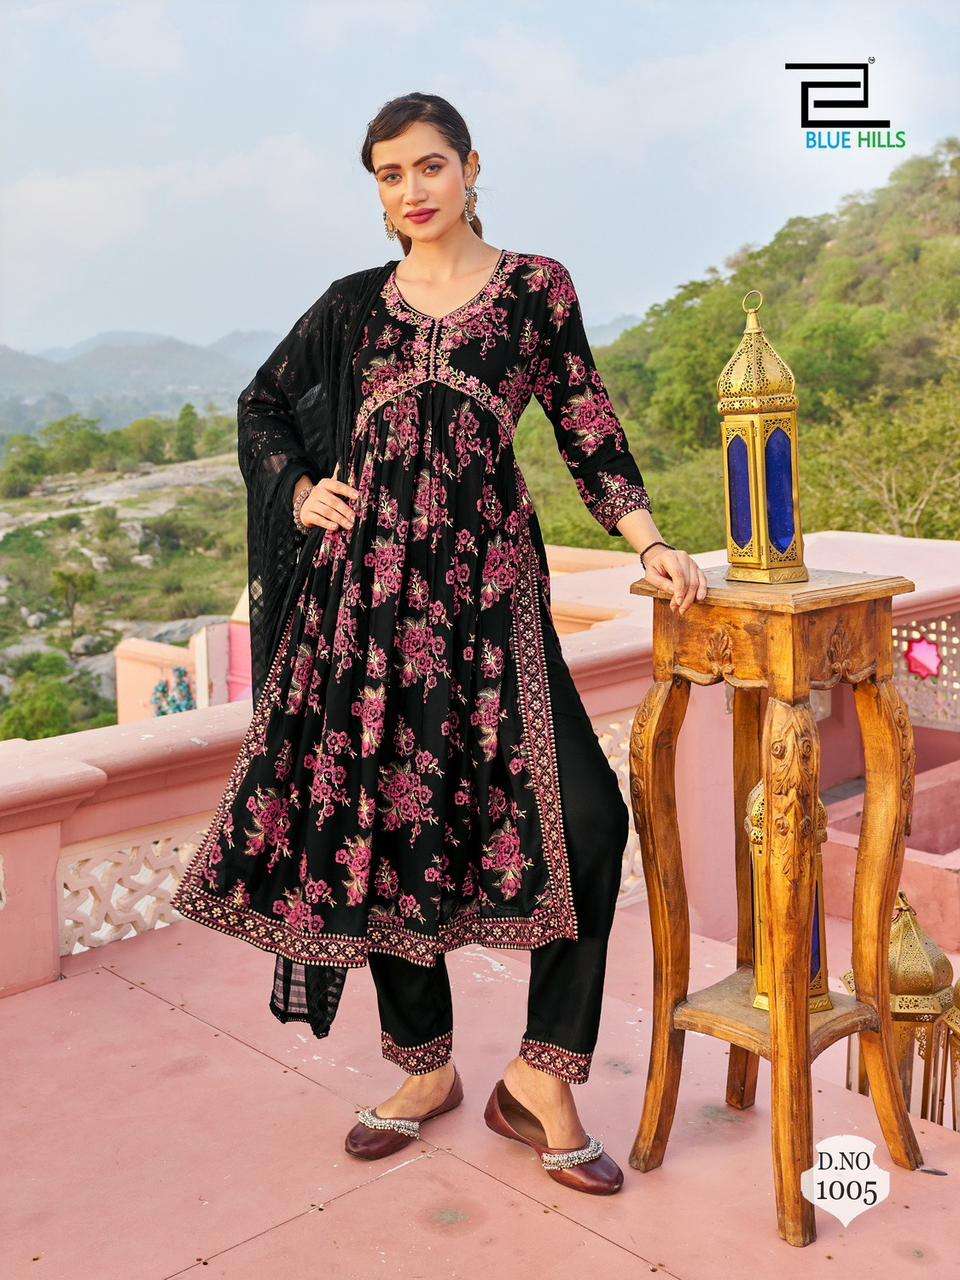 Top Simple A-line Kurti Designs That Are in Style